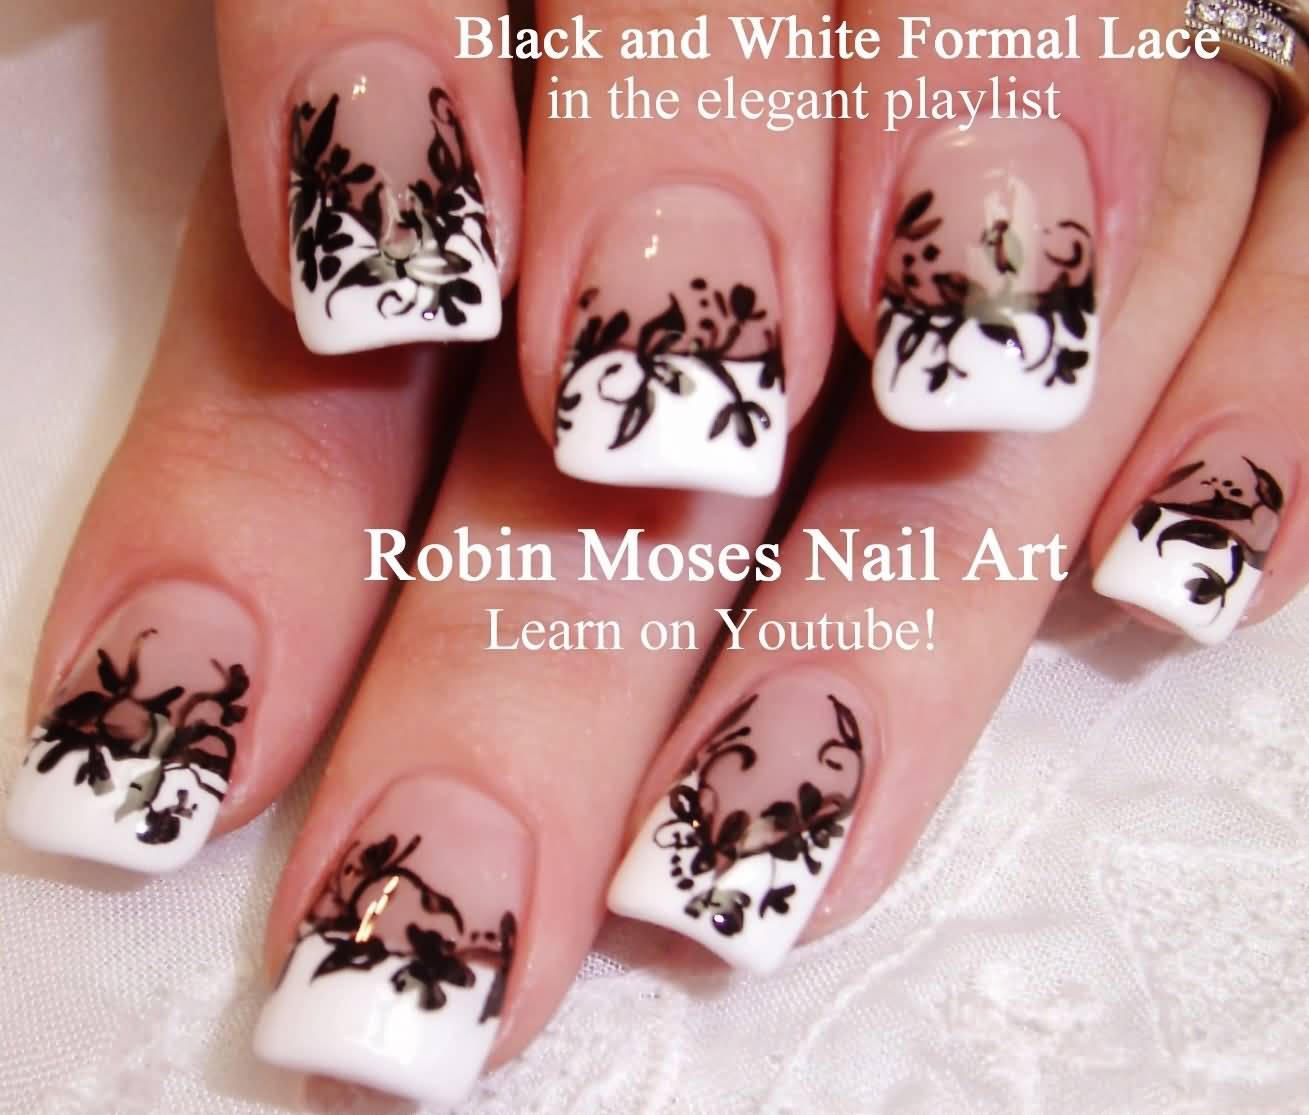 Black Formal Lace Nail Art With White French Tip Design